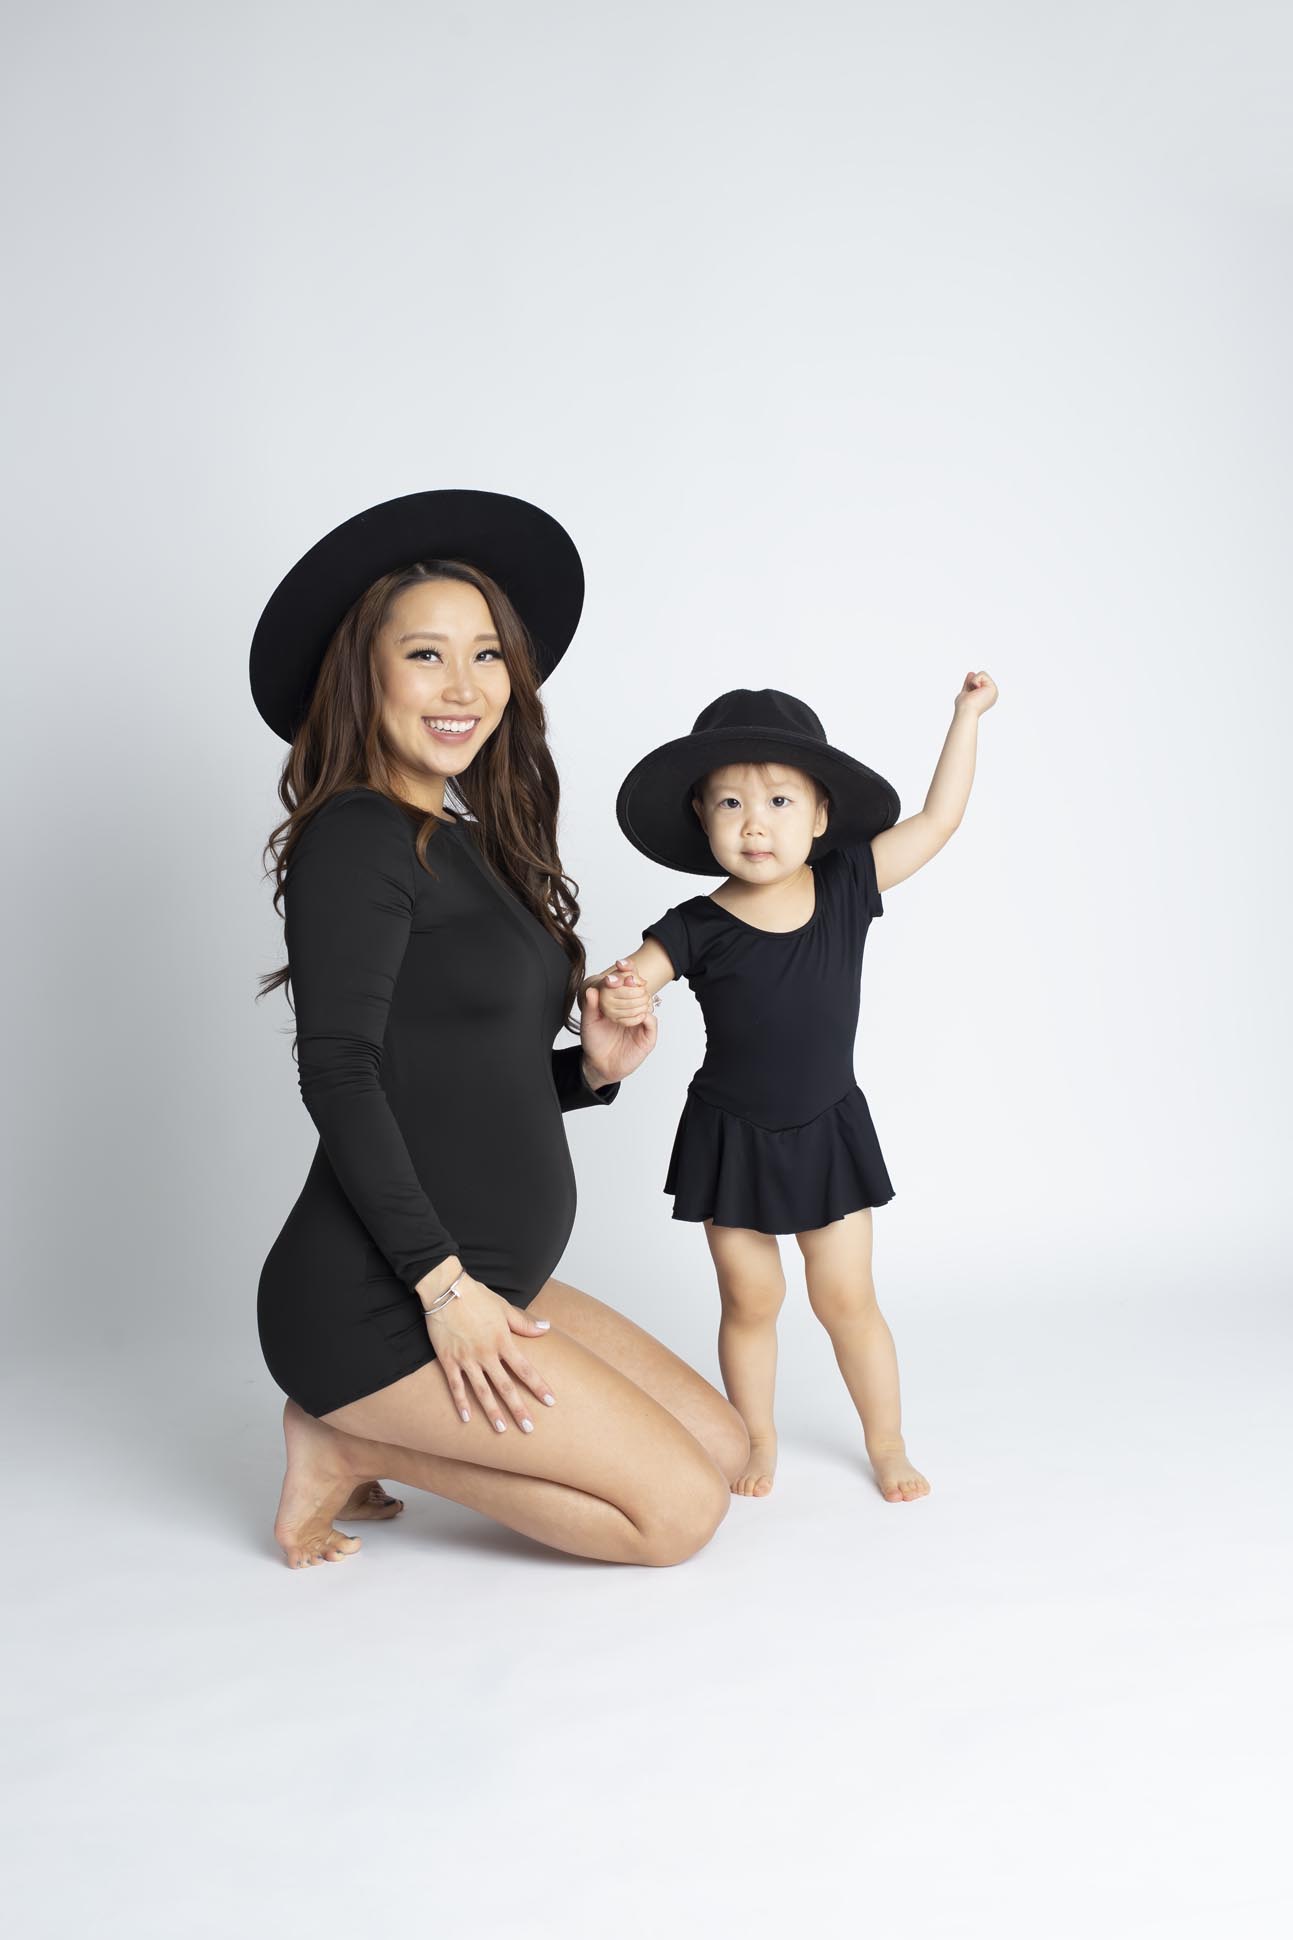 Dallas maternity photographer shares portrait of pregnant mom with young daughter both are wearing black on a white background